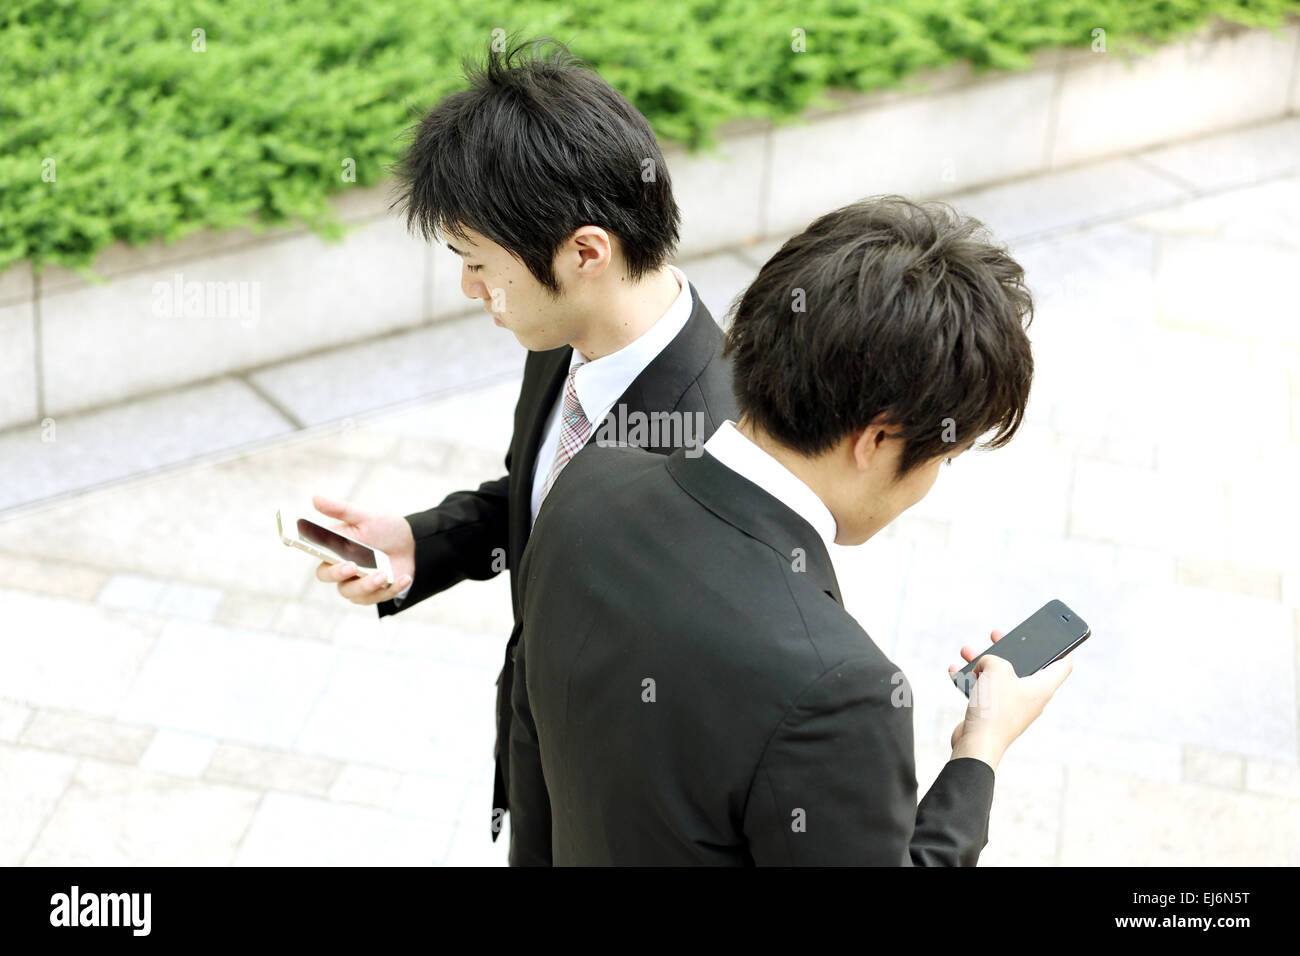 Two Japanese men hitting each other while walking with smartphones Stock Photo